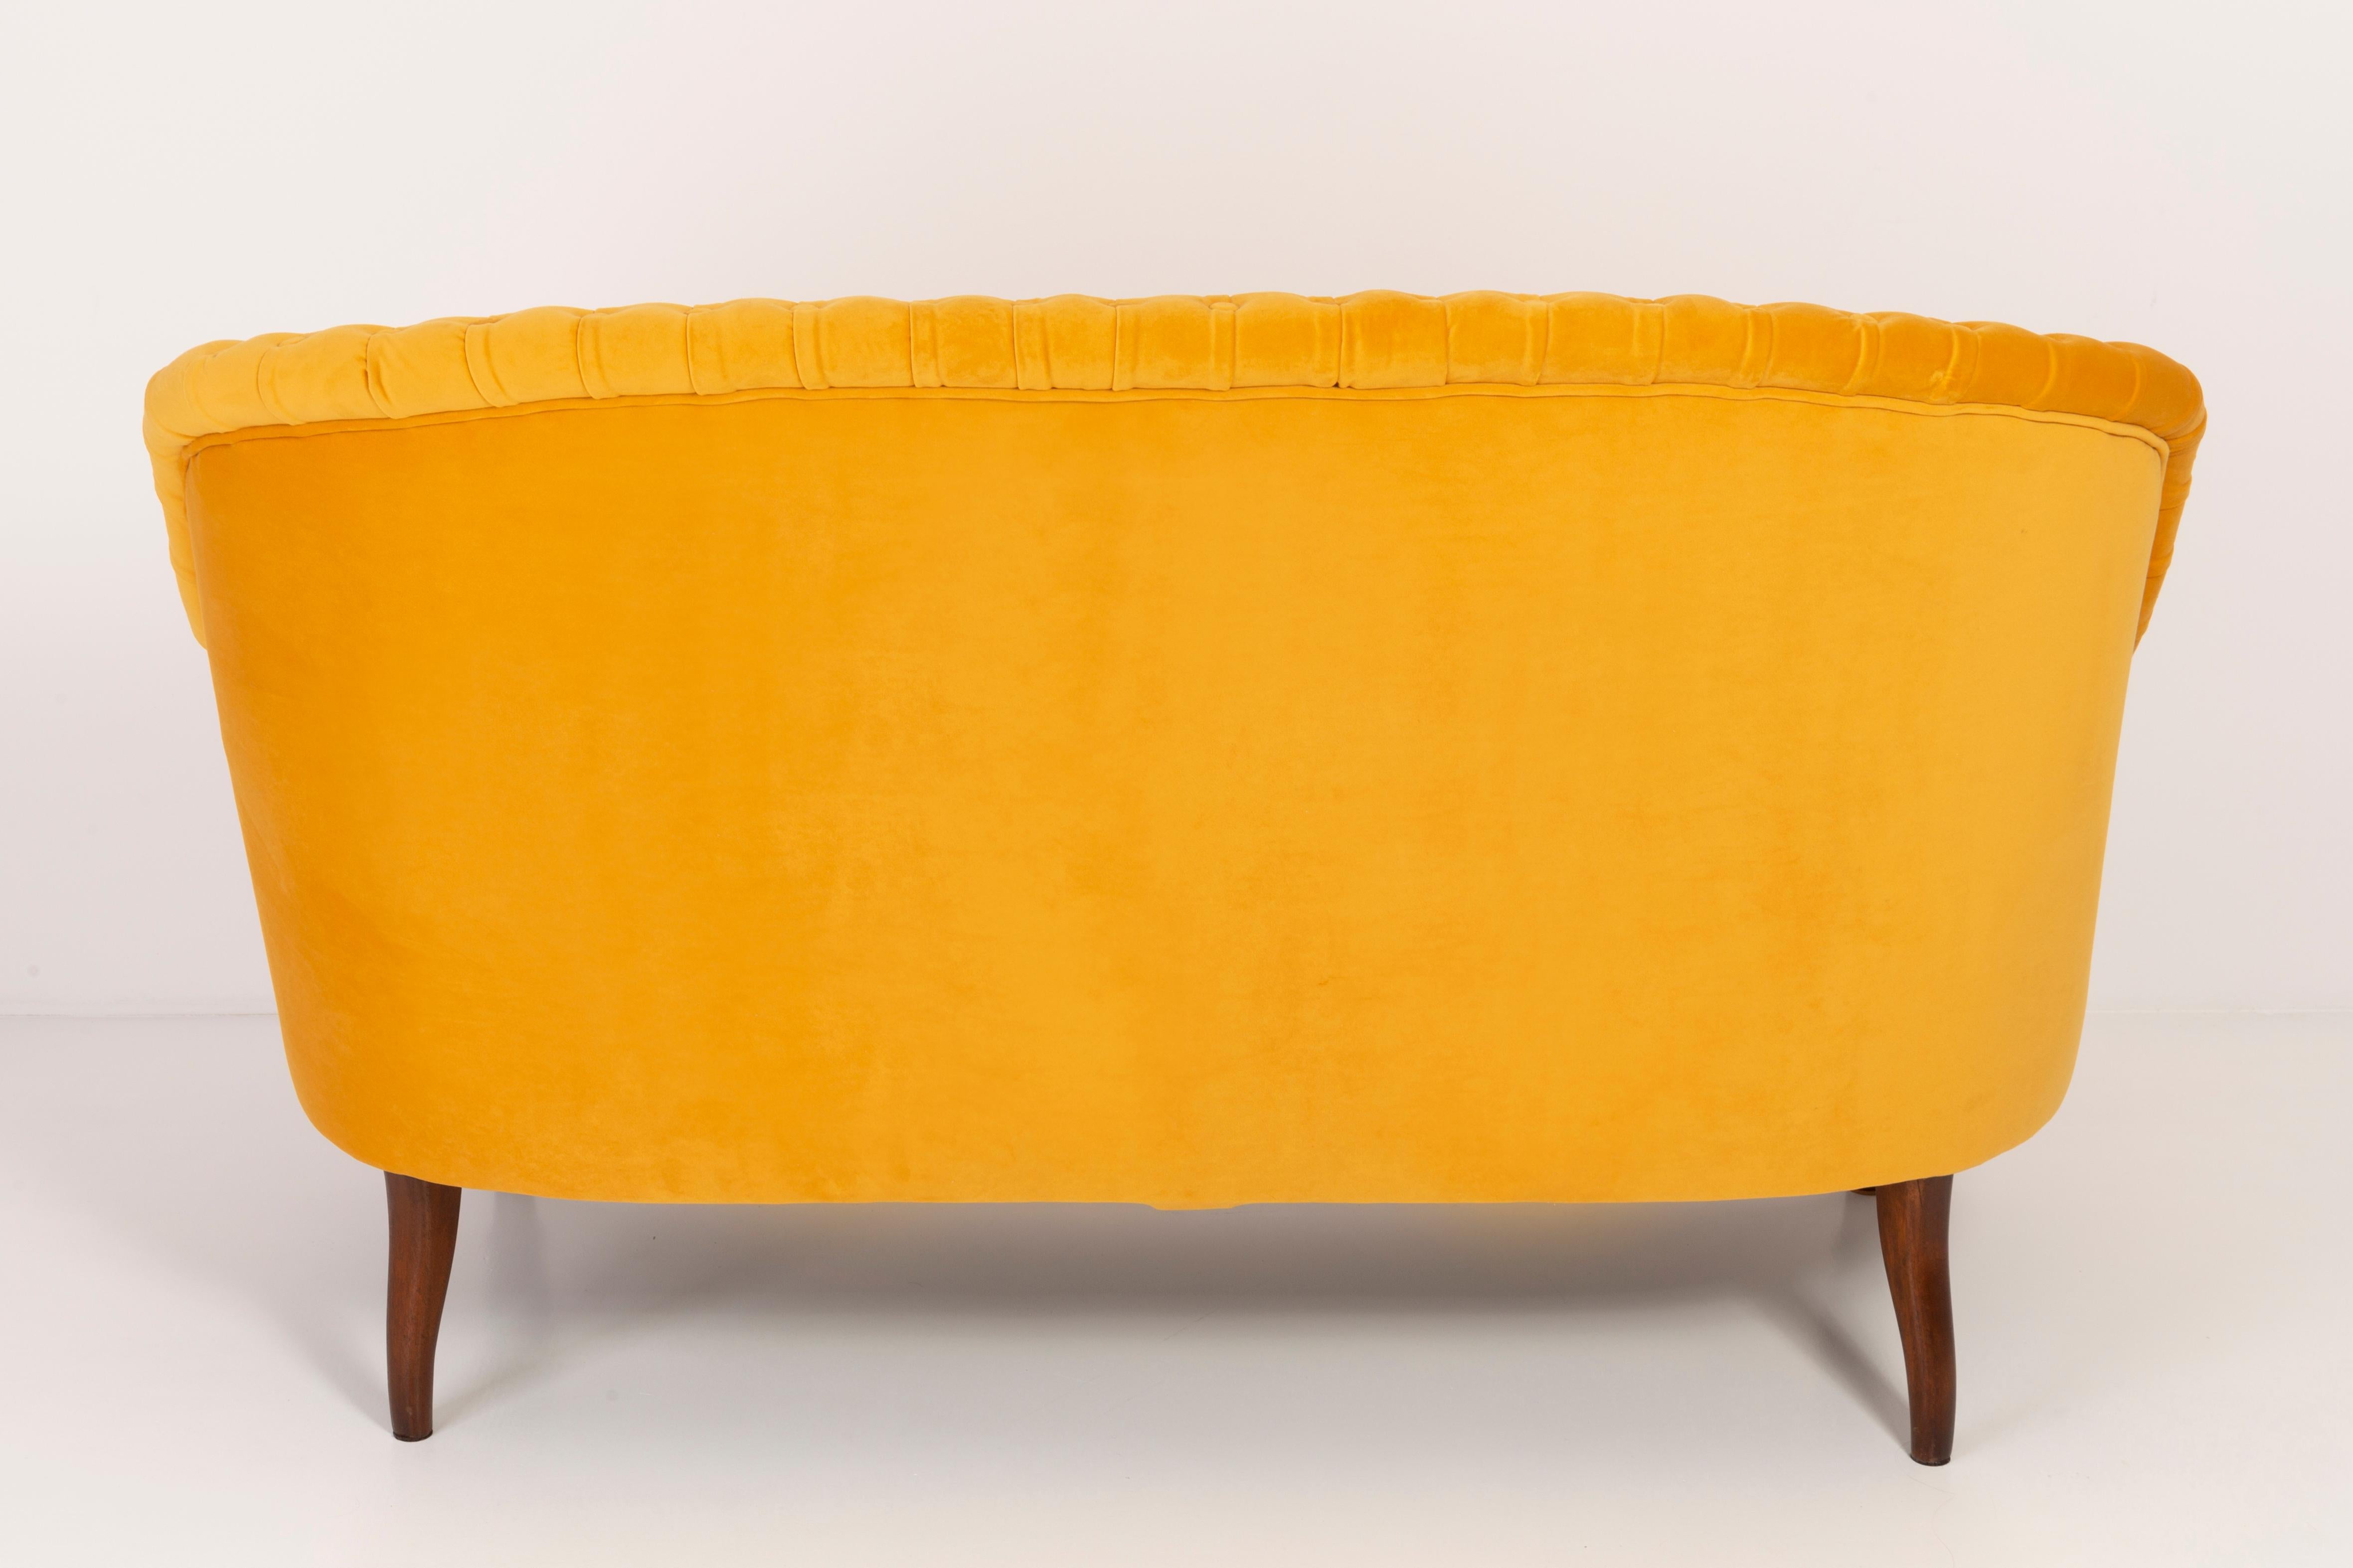 Sofa in Louis XVI Style Yellow Mustard, 1930s, Germany For Sale 2